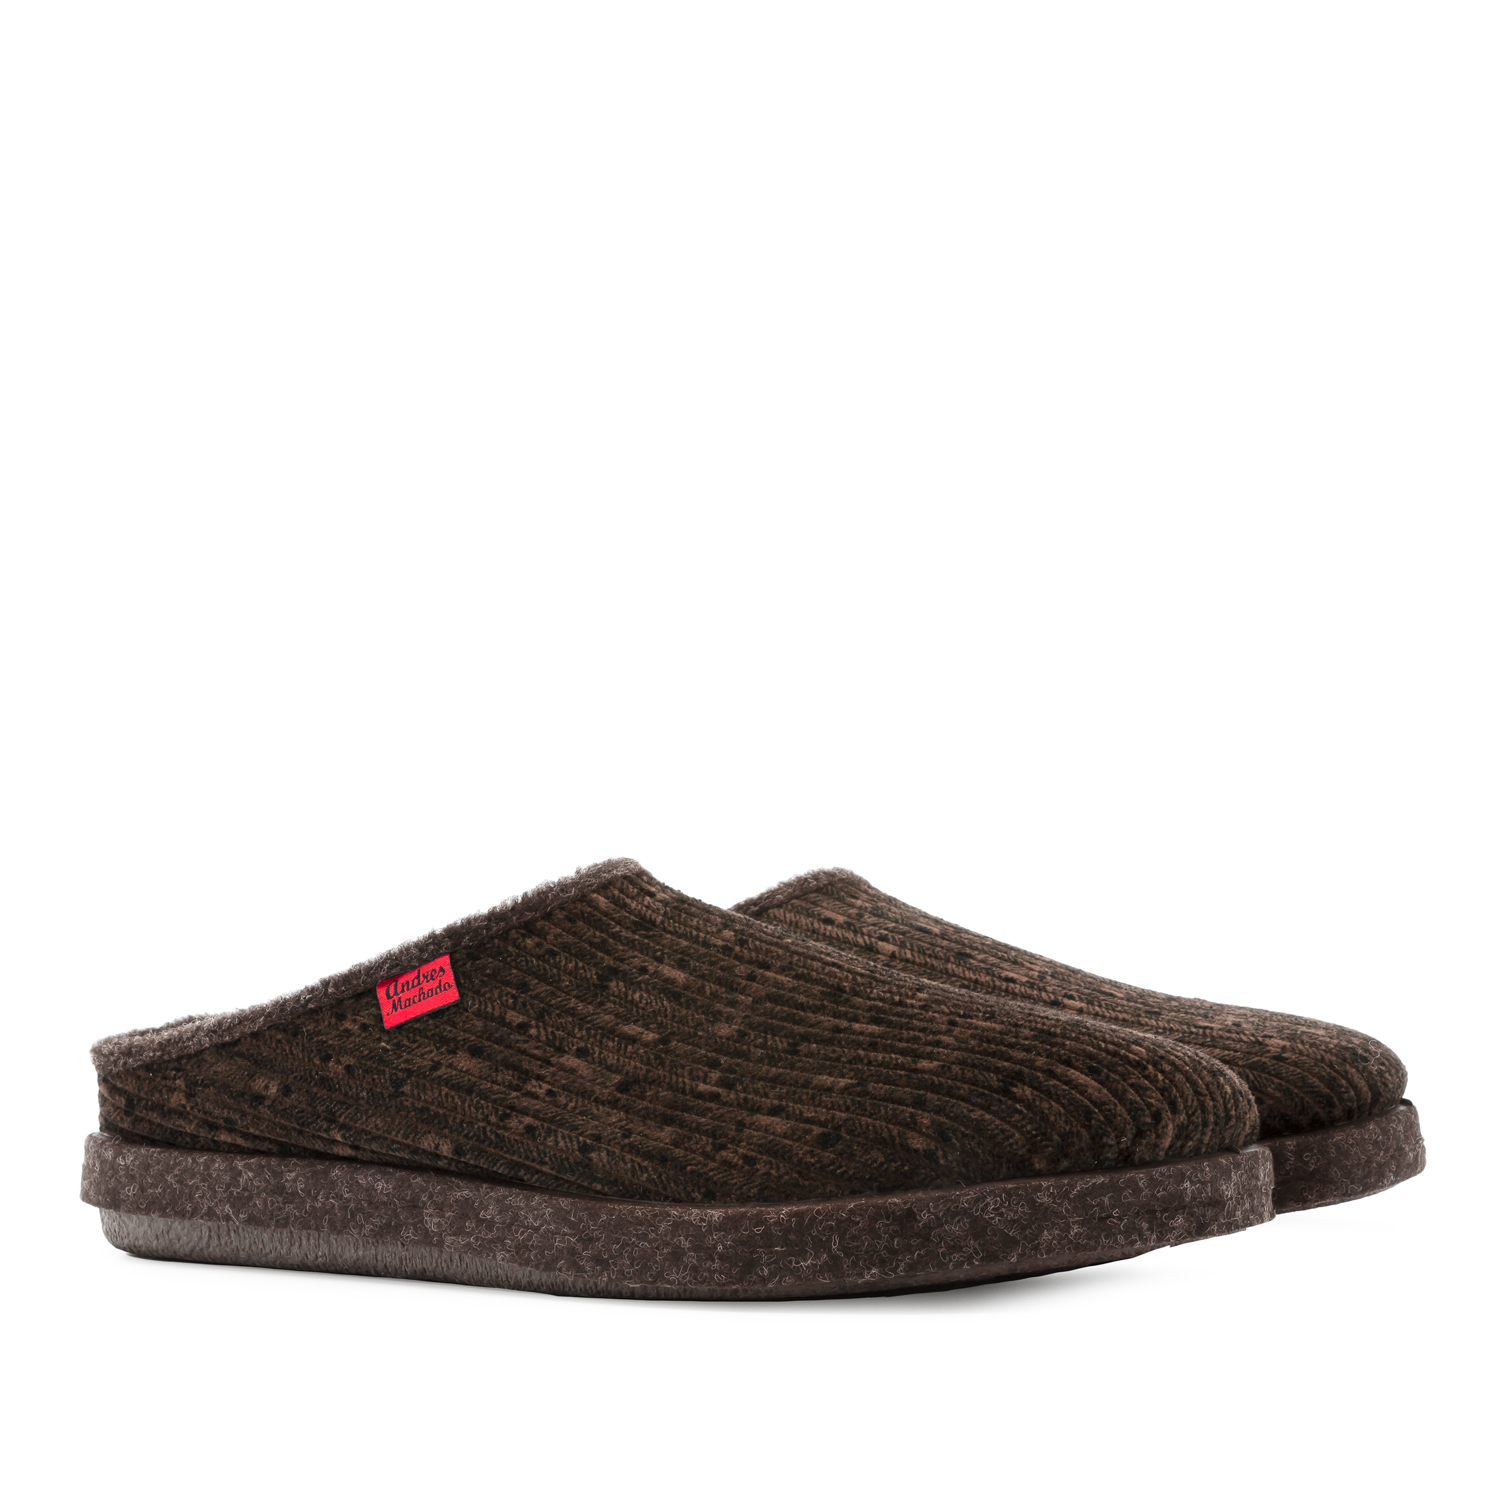 Very comfortable Brown Corduroy Slippers with footbed 